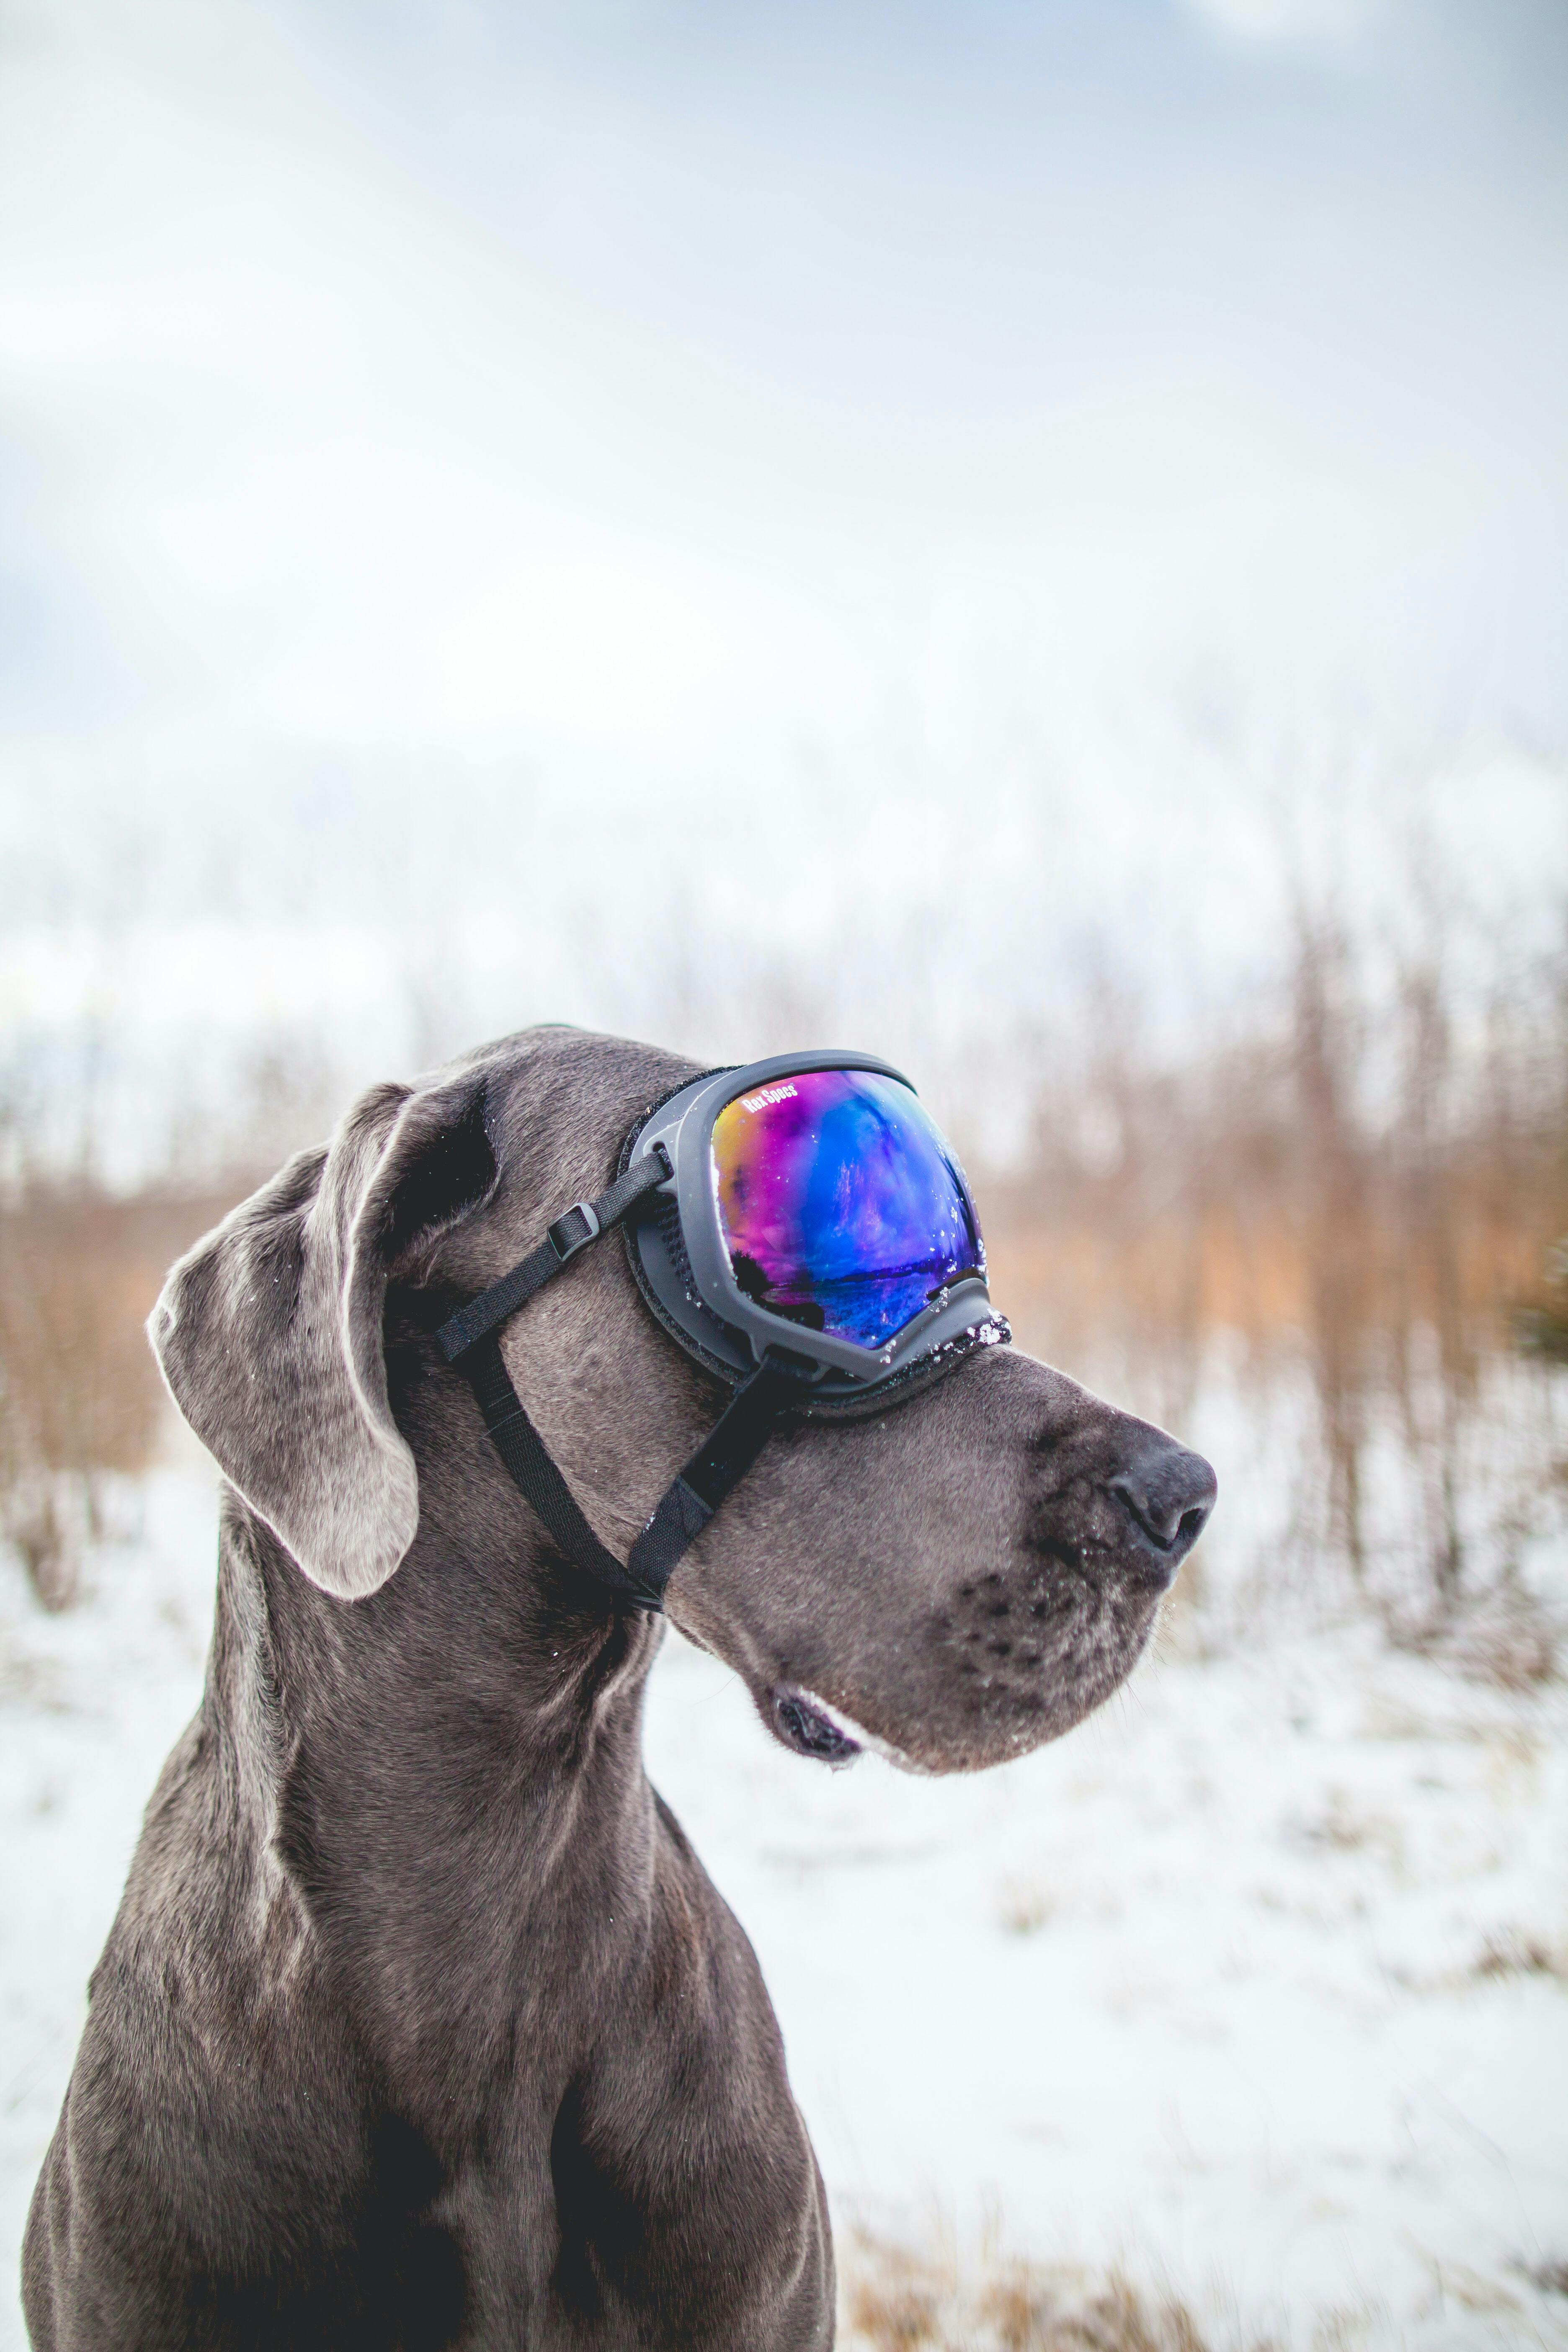 A dog wears a pair of goggles with a purple-tinted lens